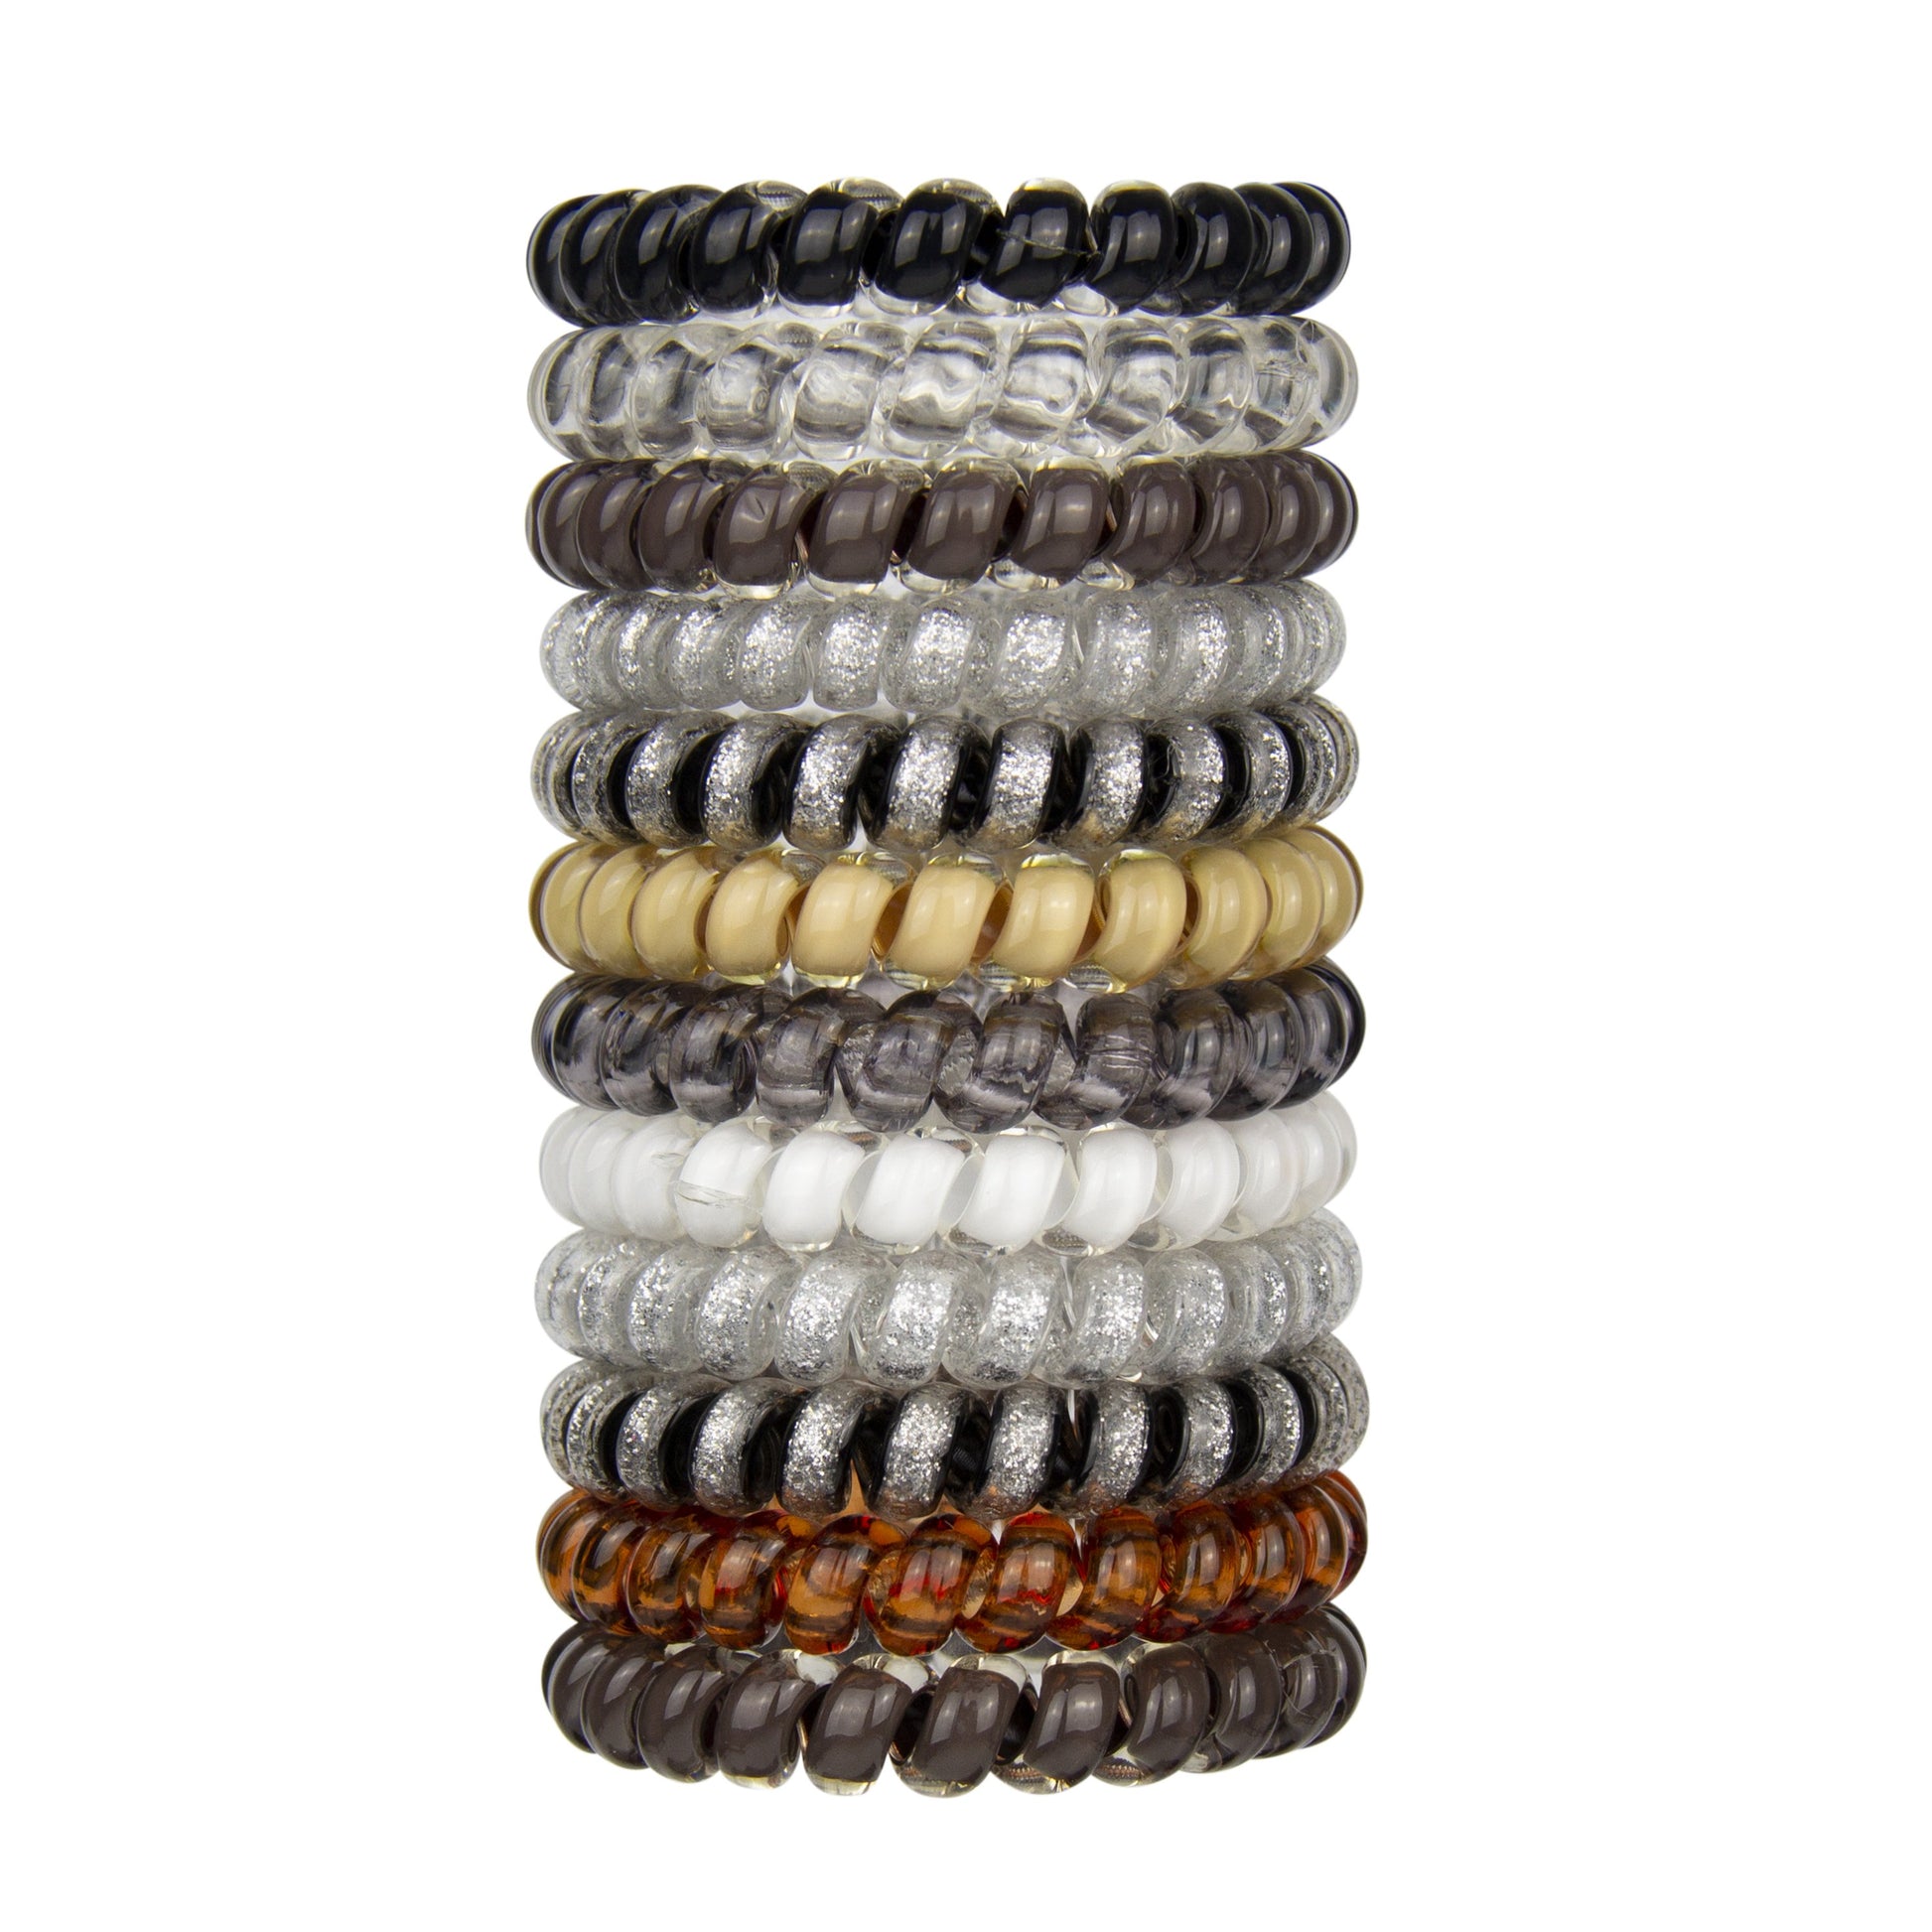 multiple neutral color swirlydo hair ties stacked against a white background